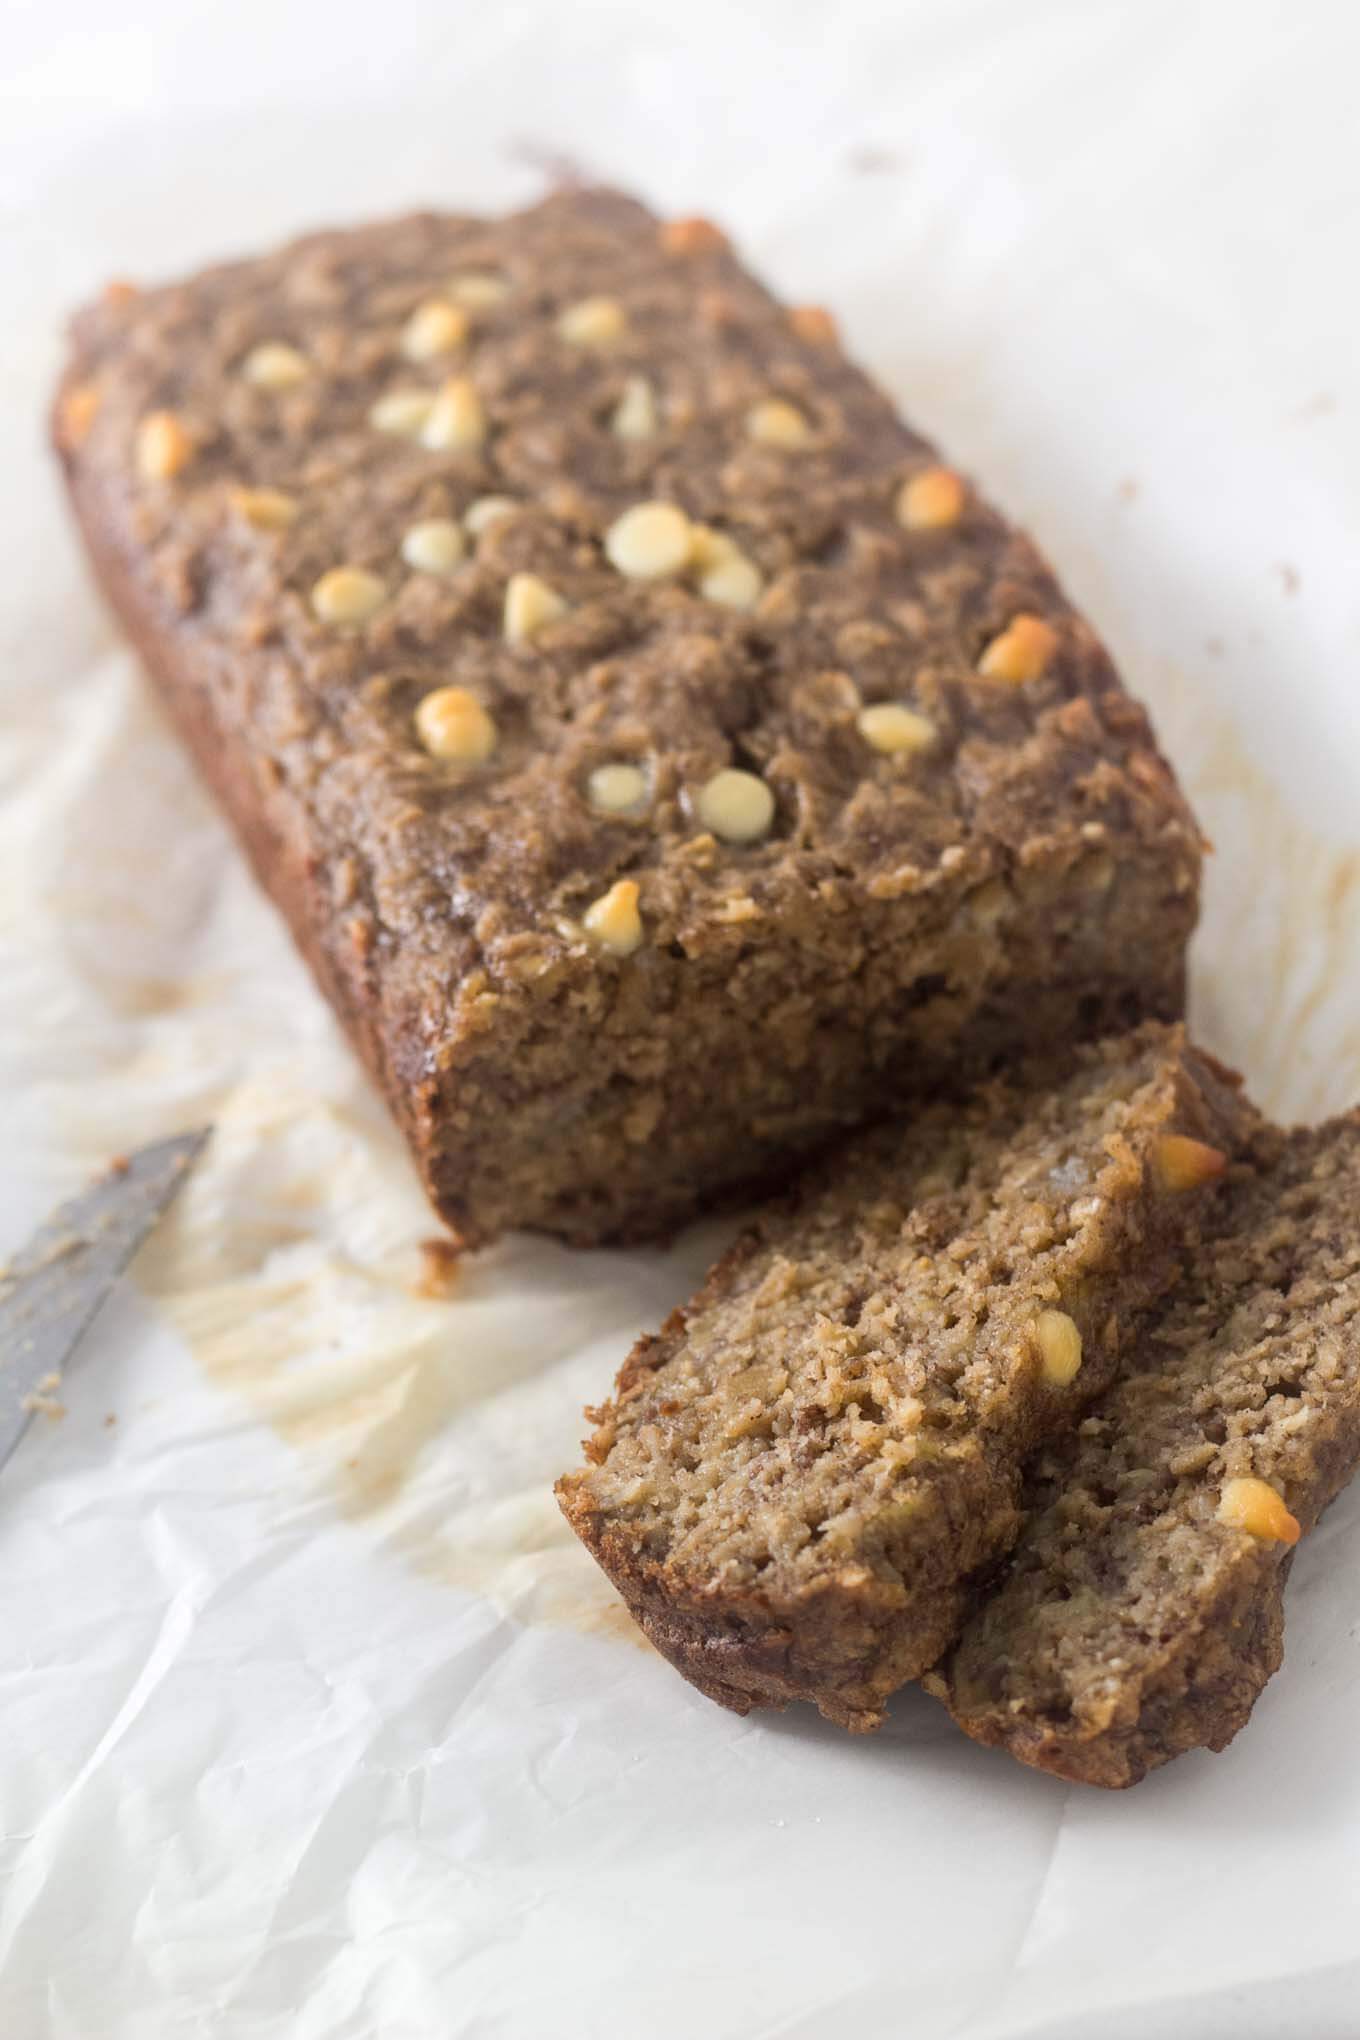 Banana Oat Bread with two cut slices.